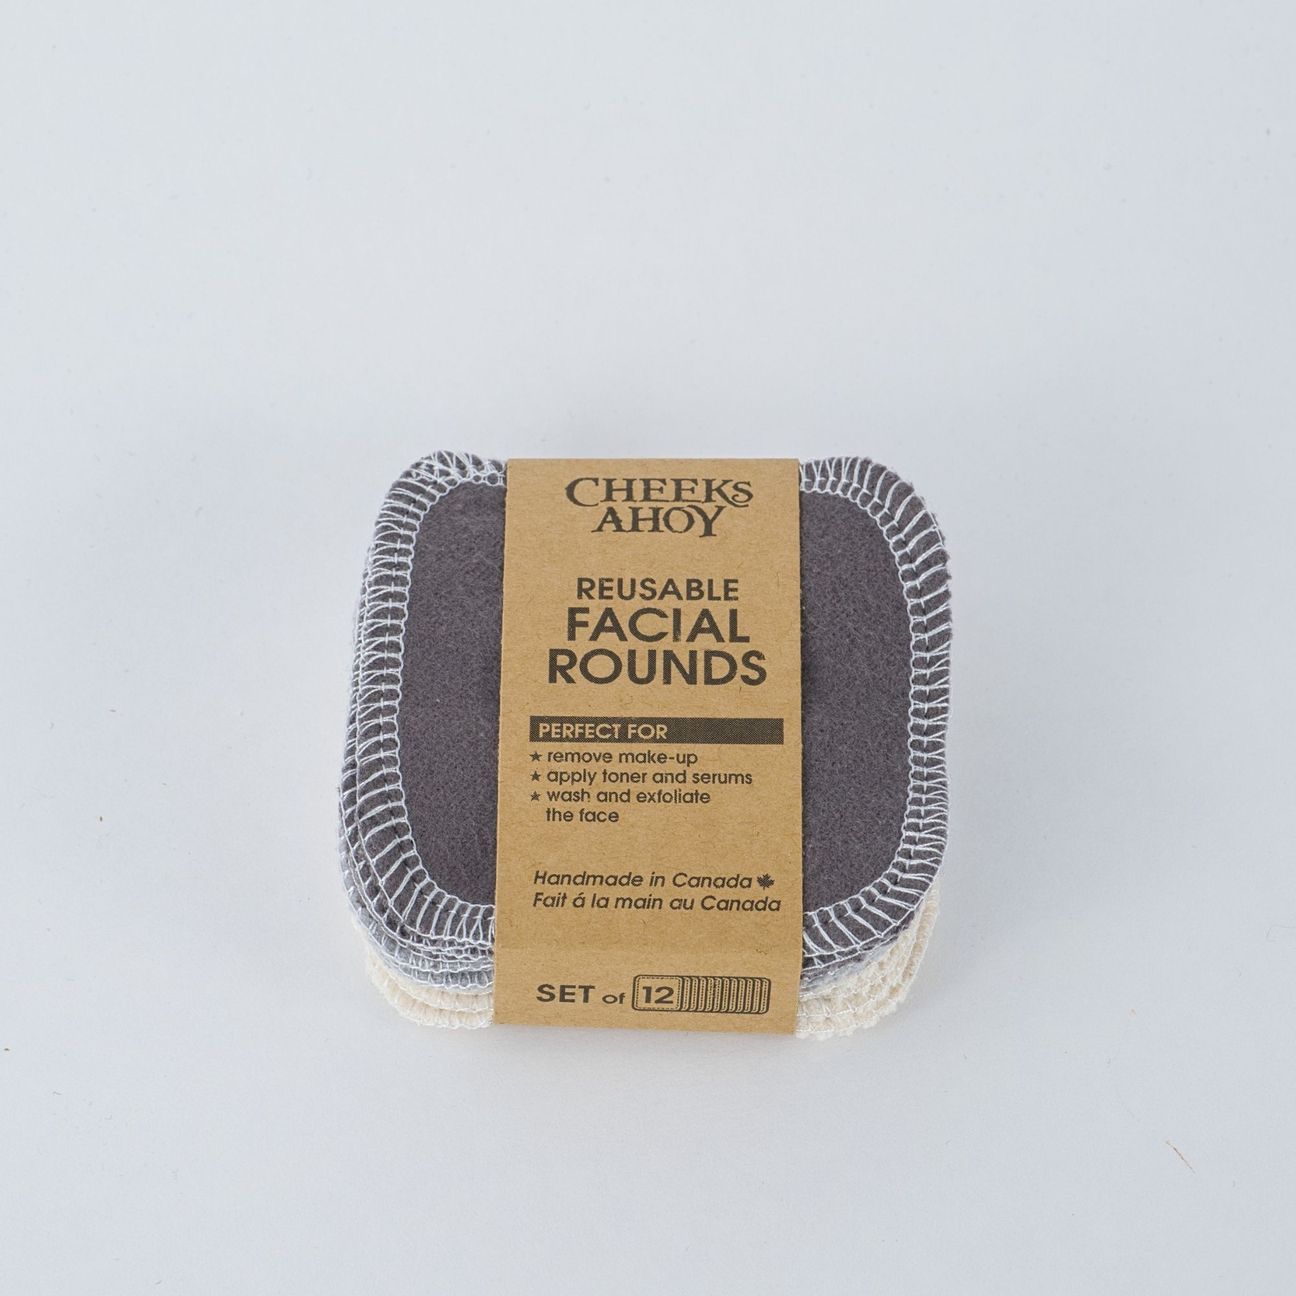 cheeks ahoy set of 12 reusable facial rounds warm neutrals charcoal in its packaging sleeve